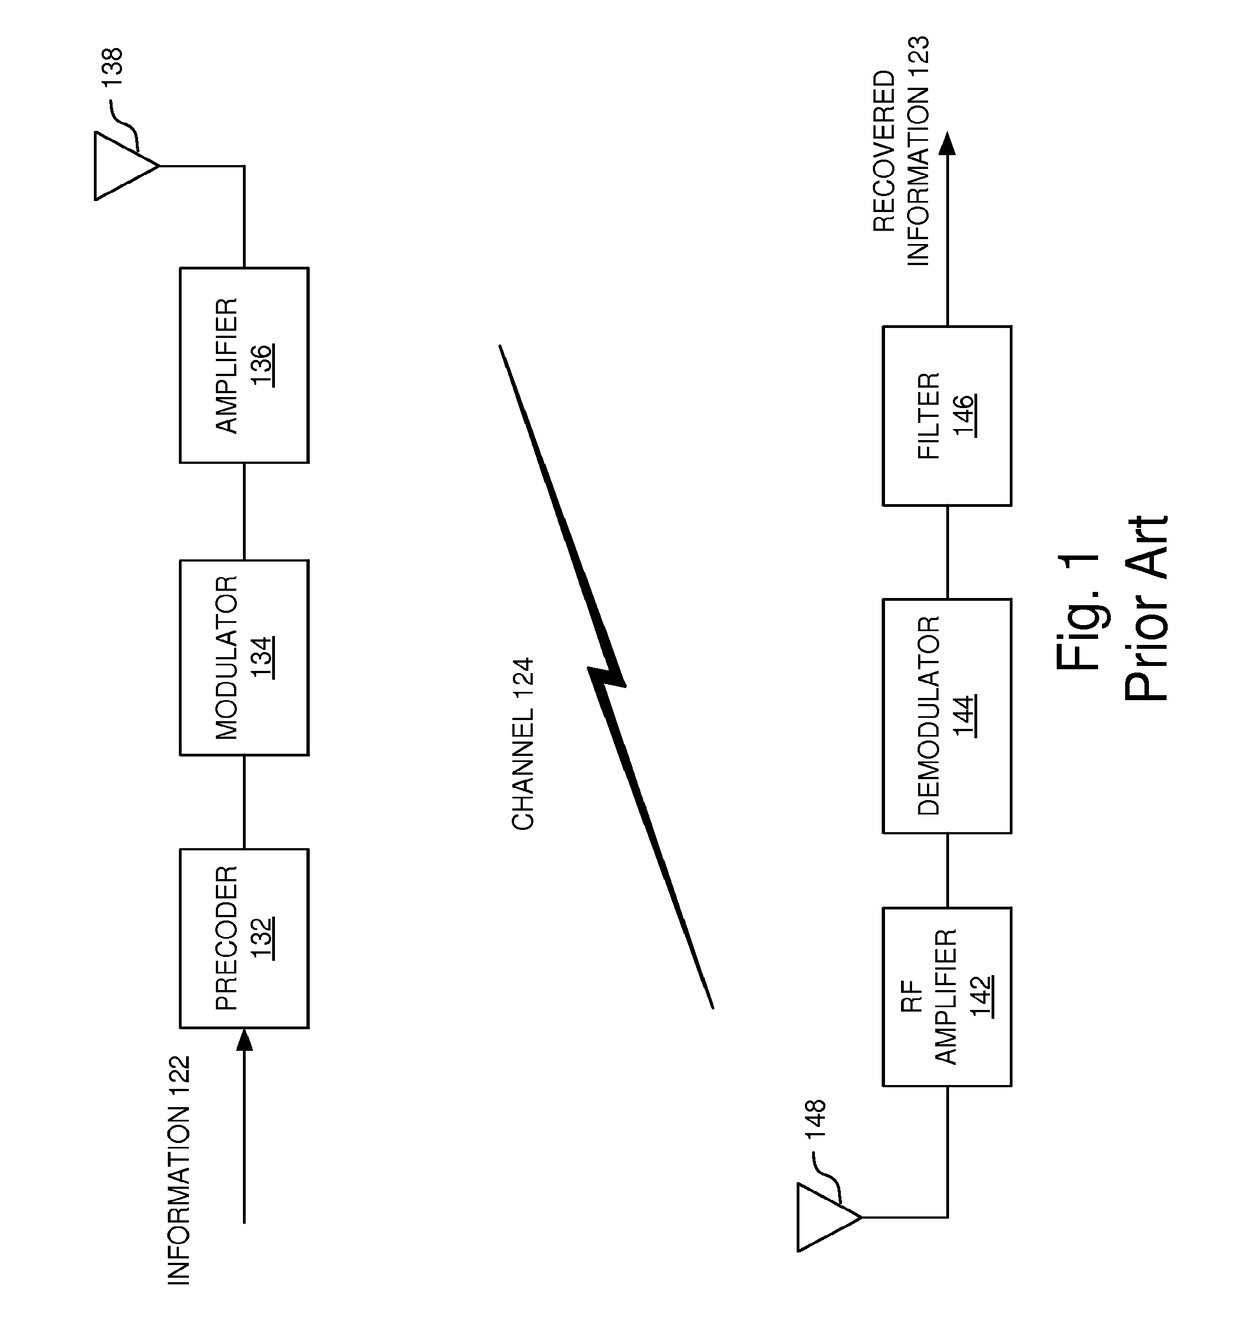 Sampling rate synchronization between transmitters and receivers